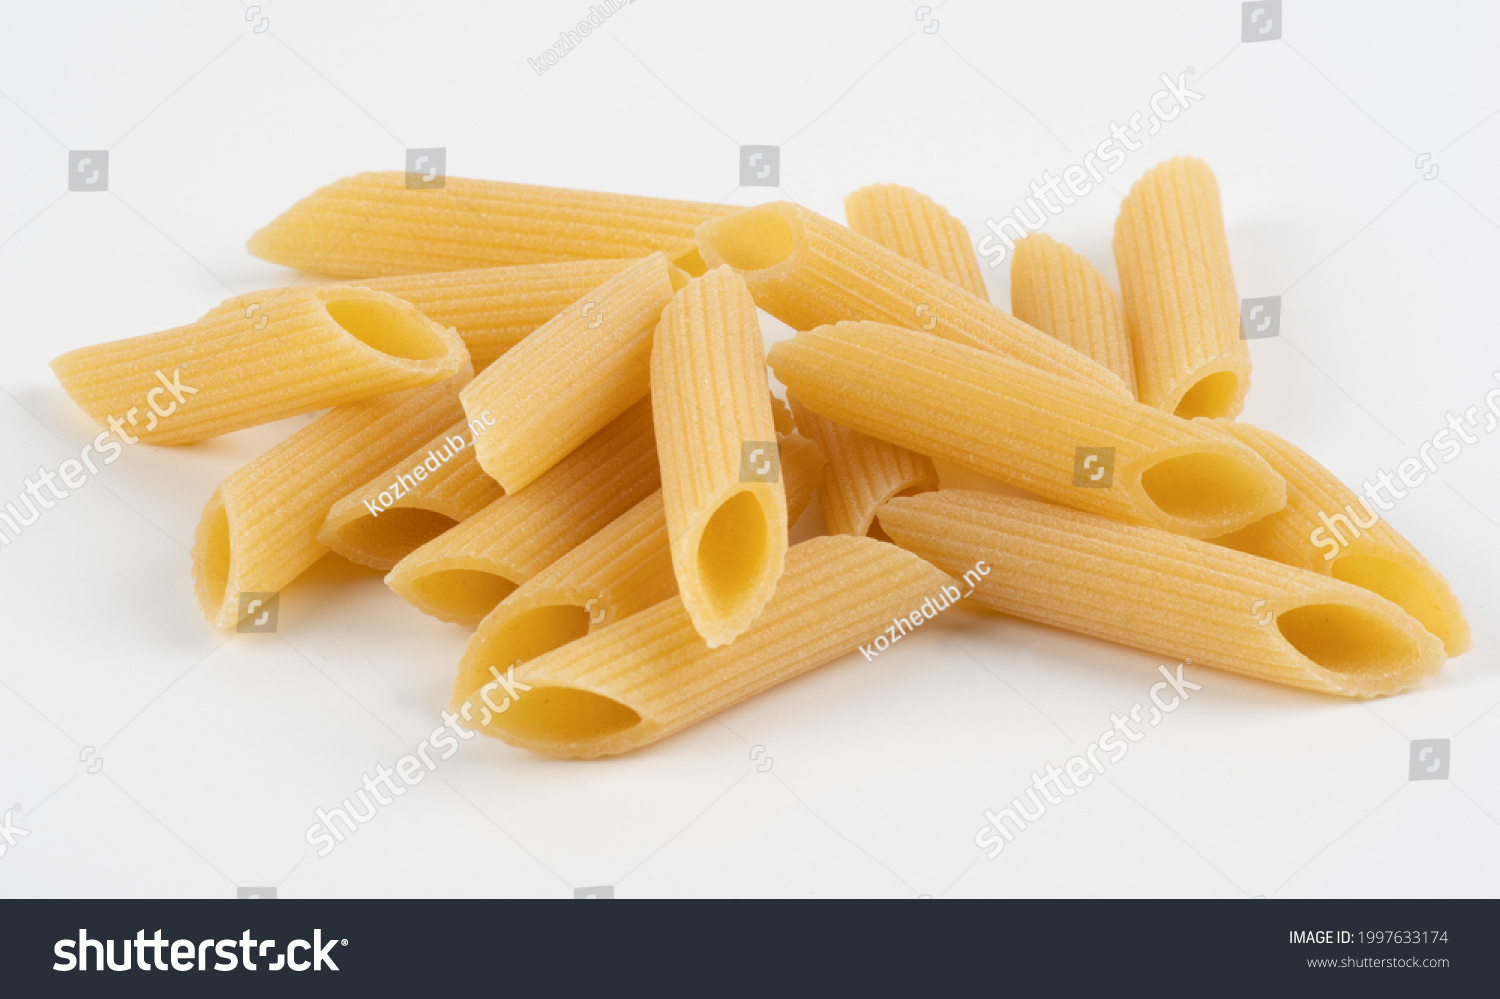 Penne pasta isolated on white #1997633174